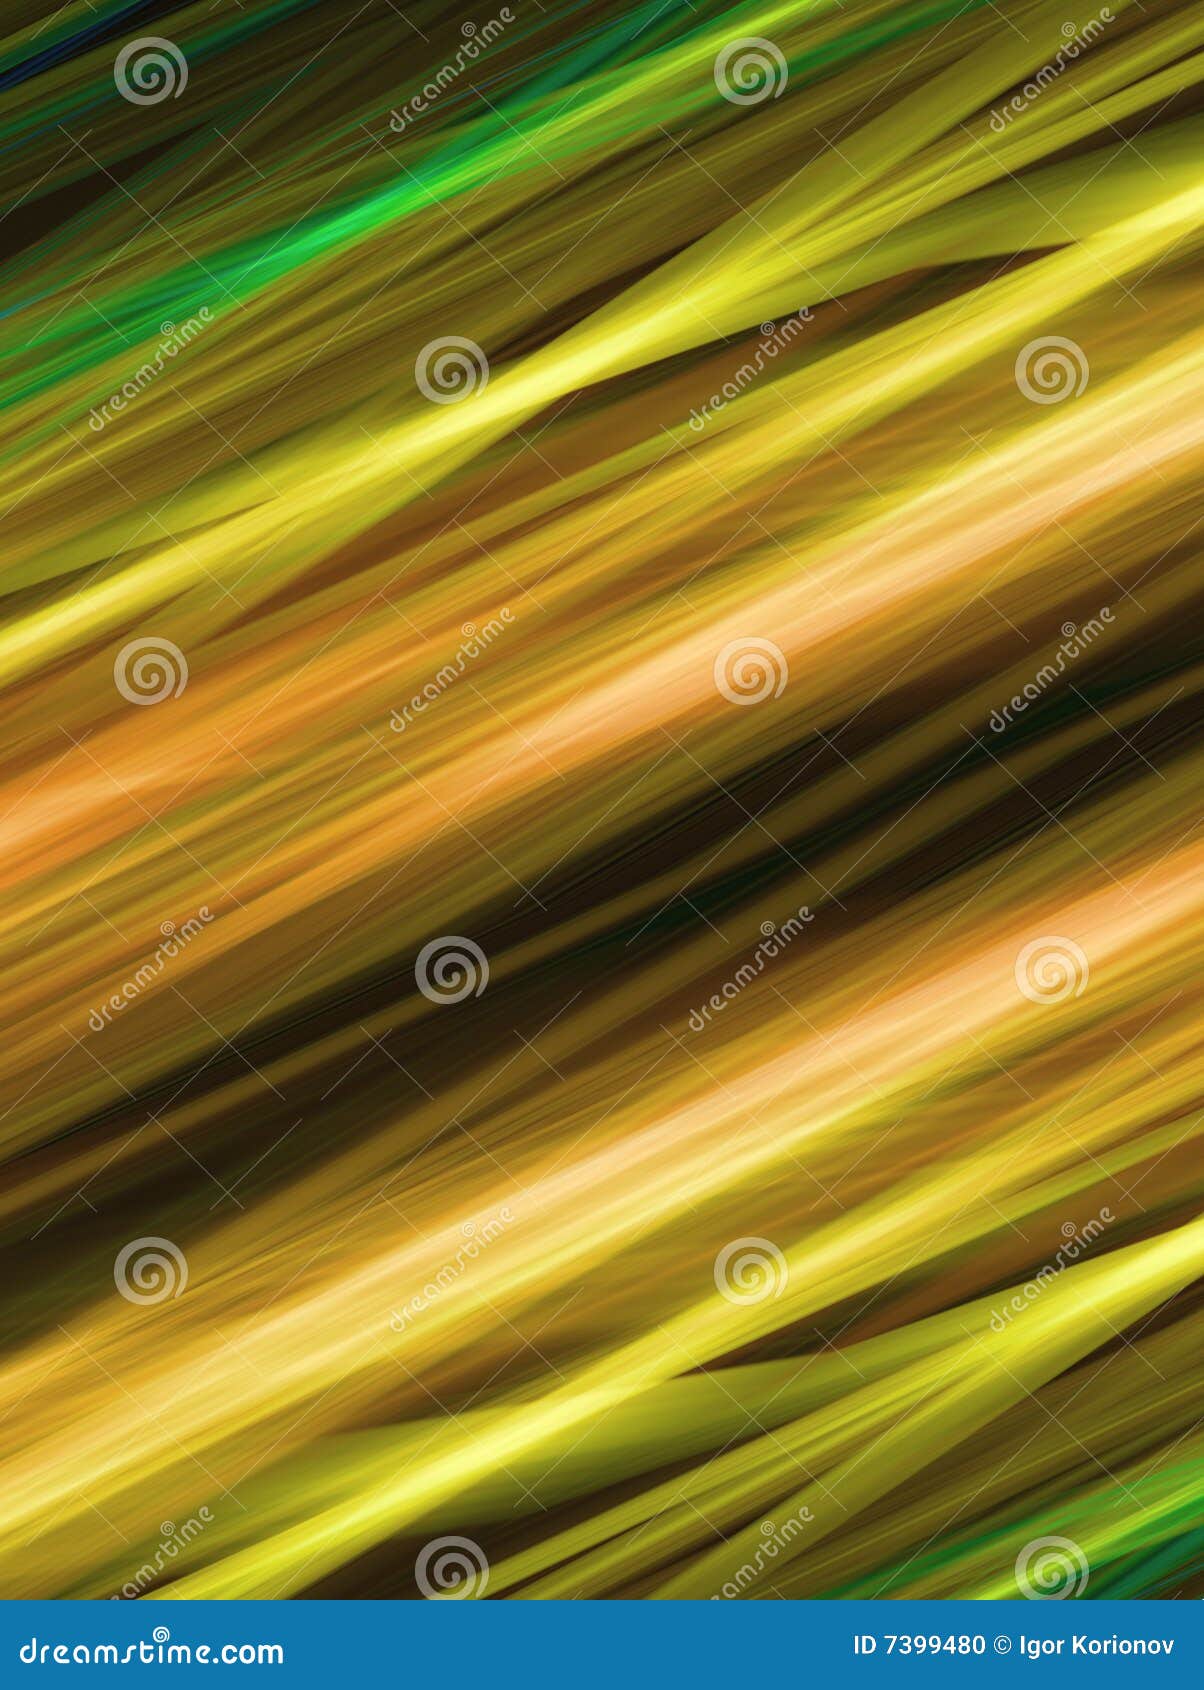 abstract background with bright colour fibres